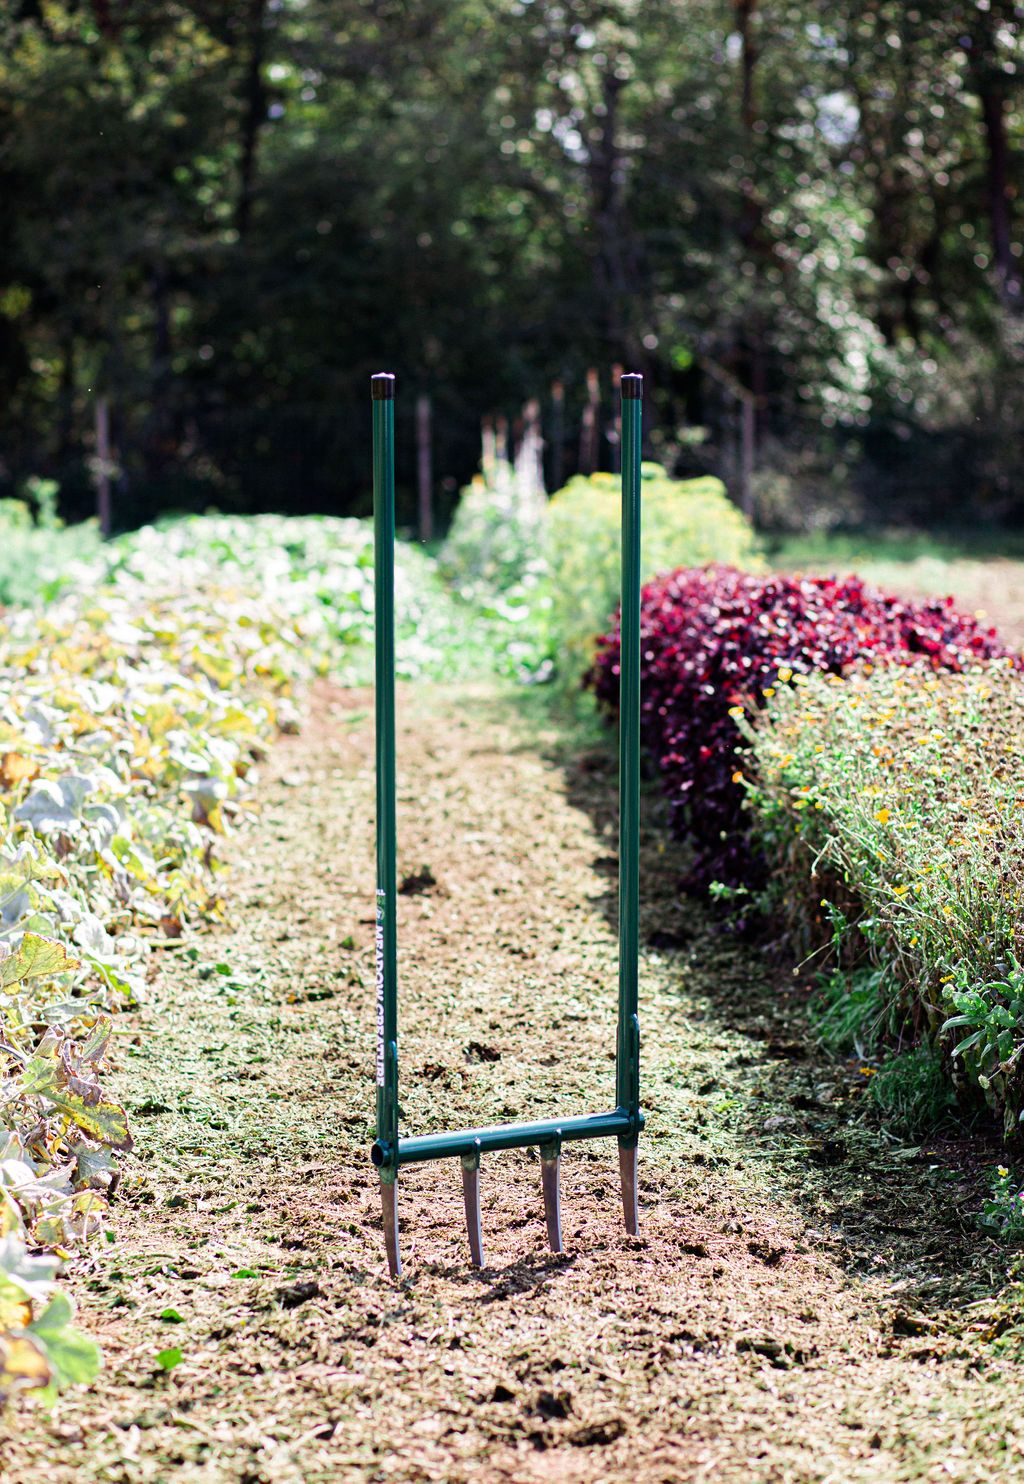 A green Broadfork with 12 inch tines is standing upright in the middle of a garden. There are rows of plants on either side. 